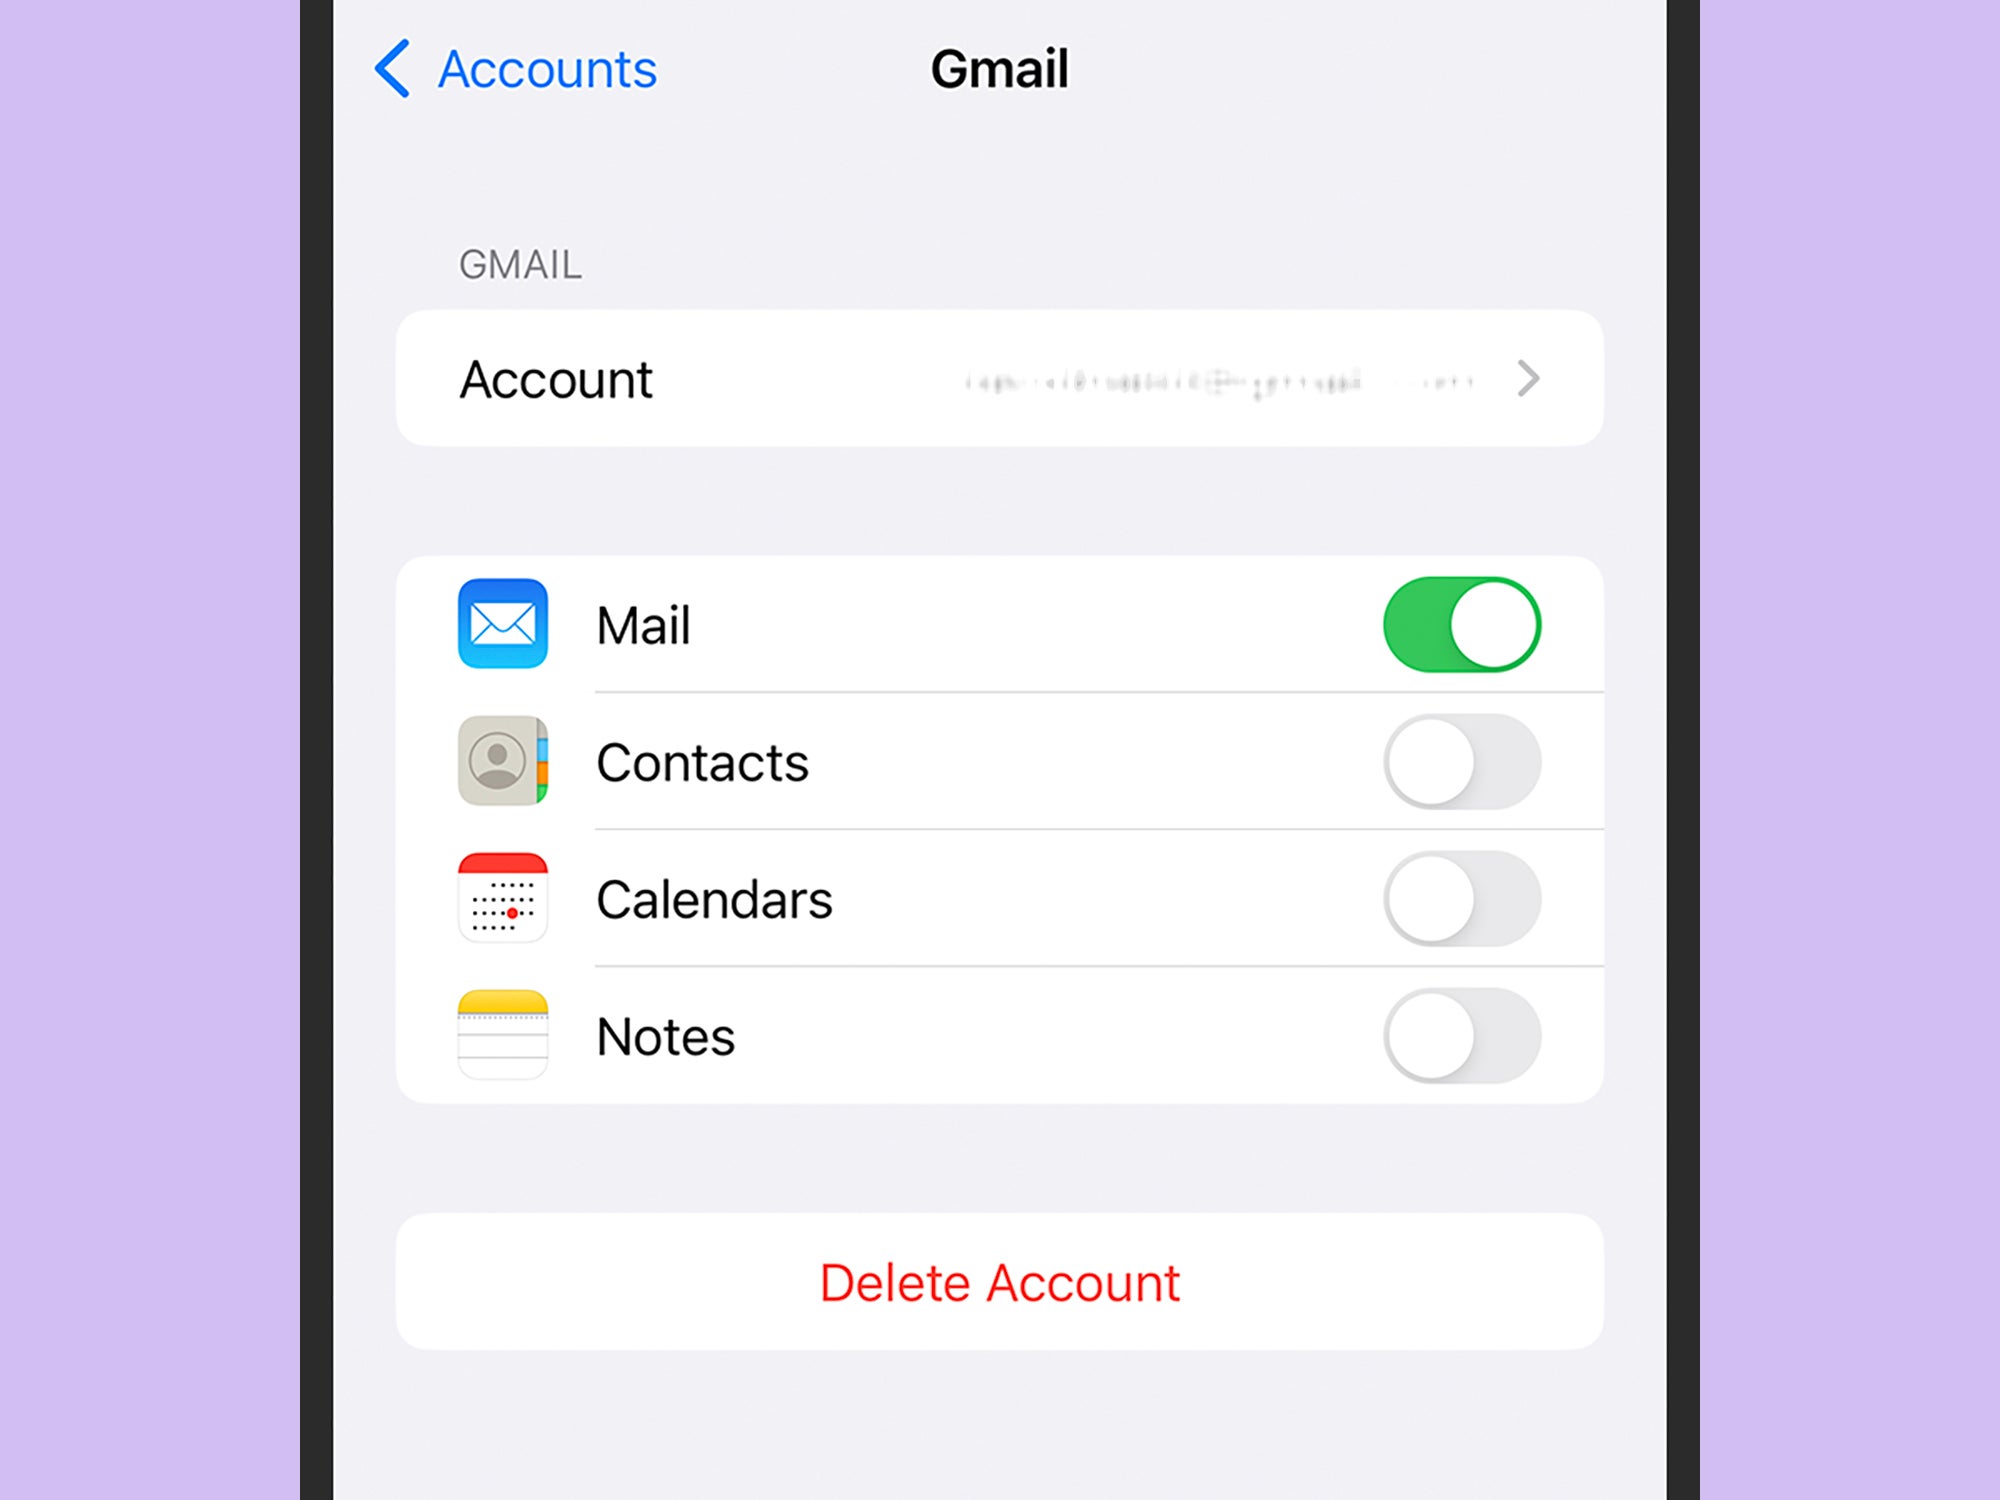 The options for deleting your Gmail account on an iPhone.